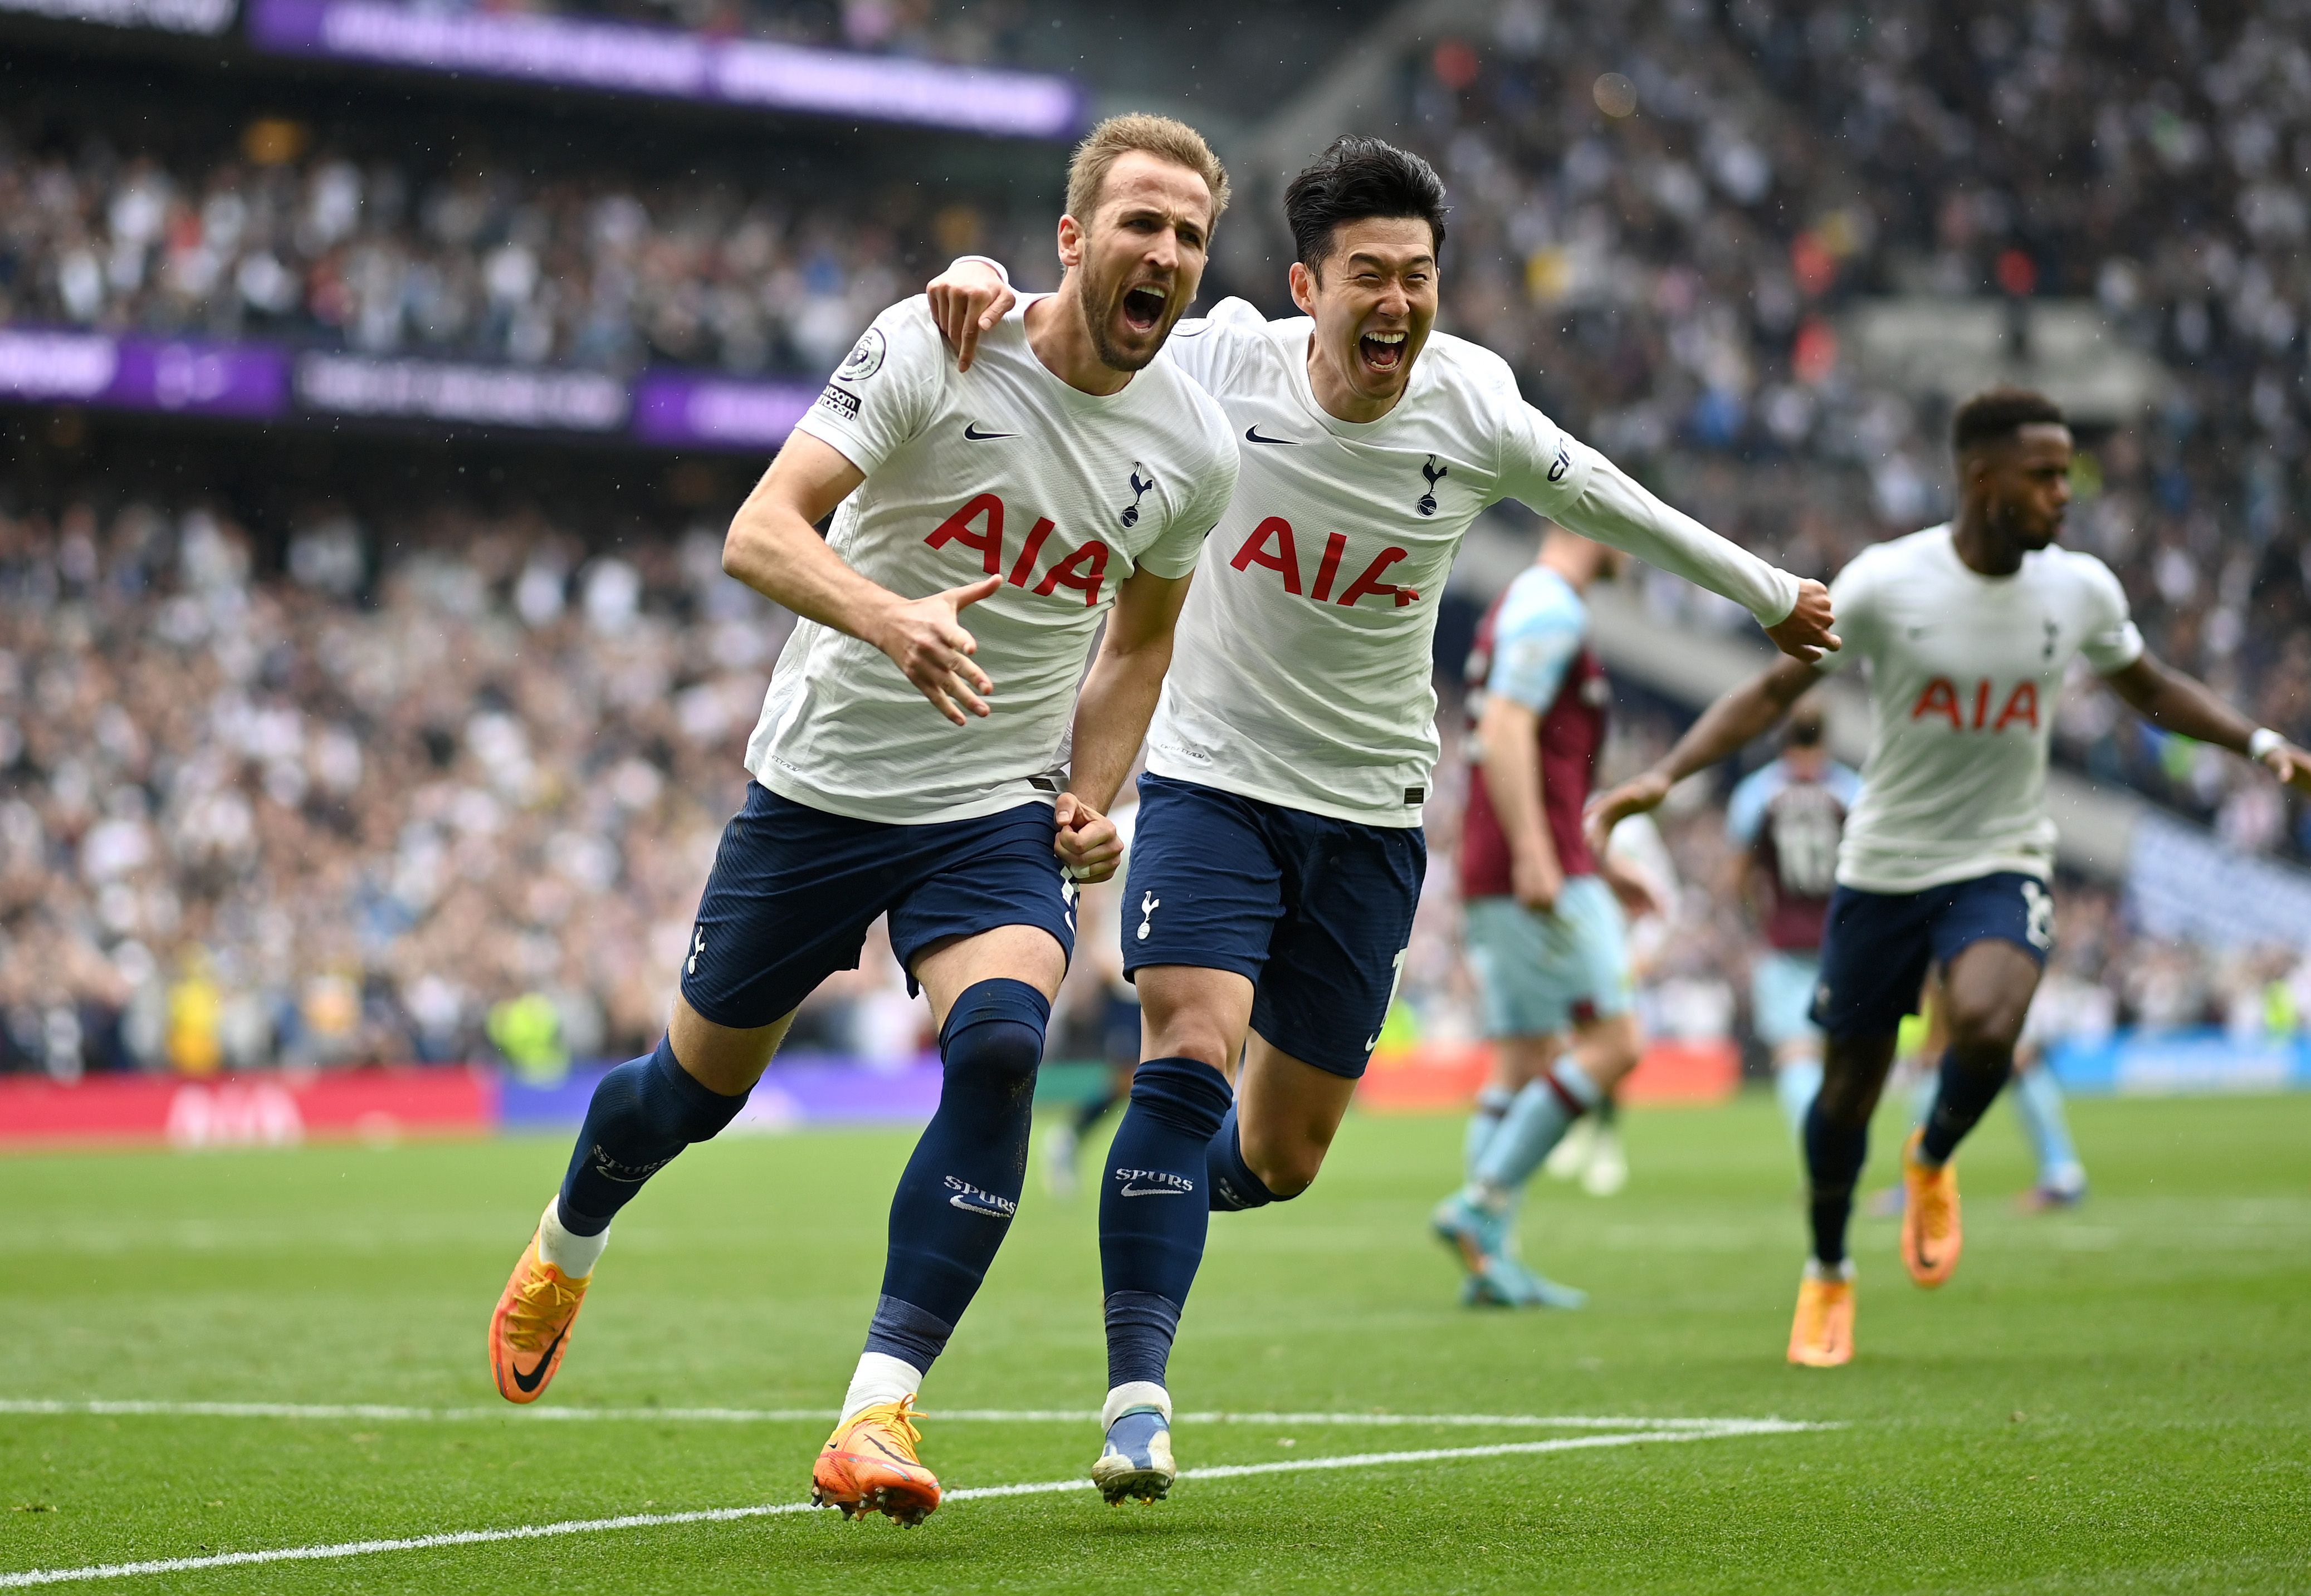 LONDON, ENGLAND - MAY 15: Harry Kane celebrates with Heung-Min Son of Tottenham Hotspur after scoring their team's first goal during the Premier League match between Tottenham Hotspur and Burnley at Tottenham Hotspur Stadium on May 15, 2022 in London, England. (Photo by Shaun Botterill/Getty Images)